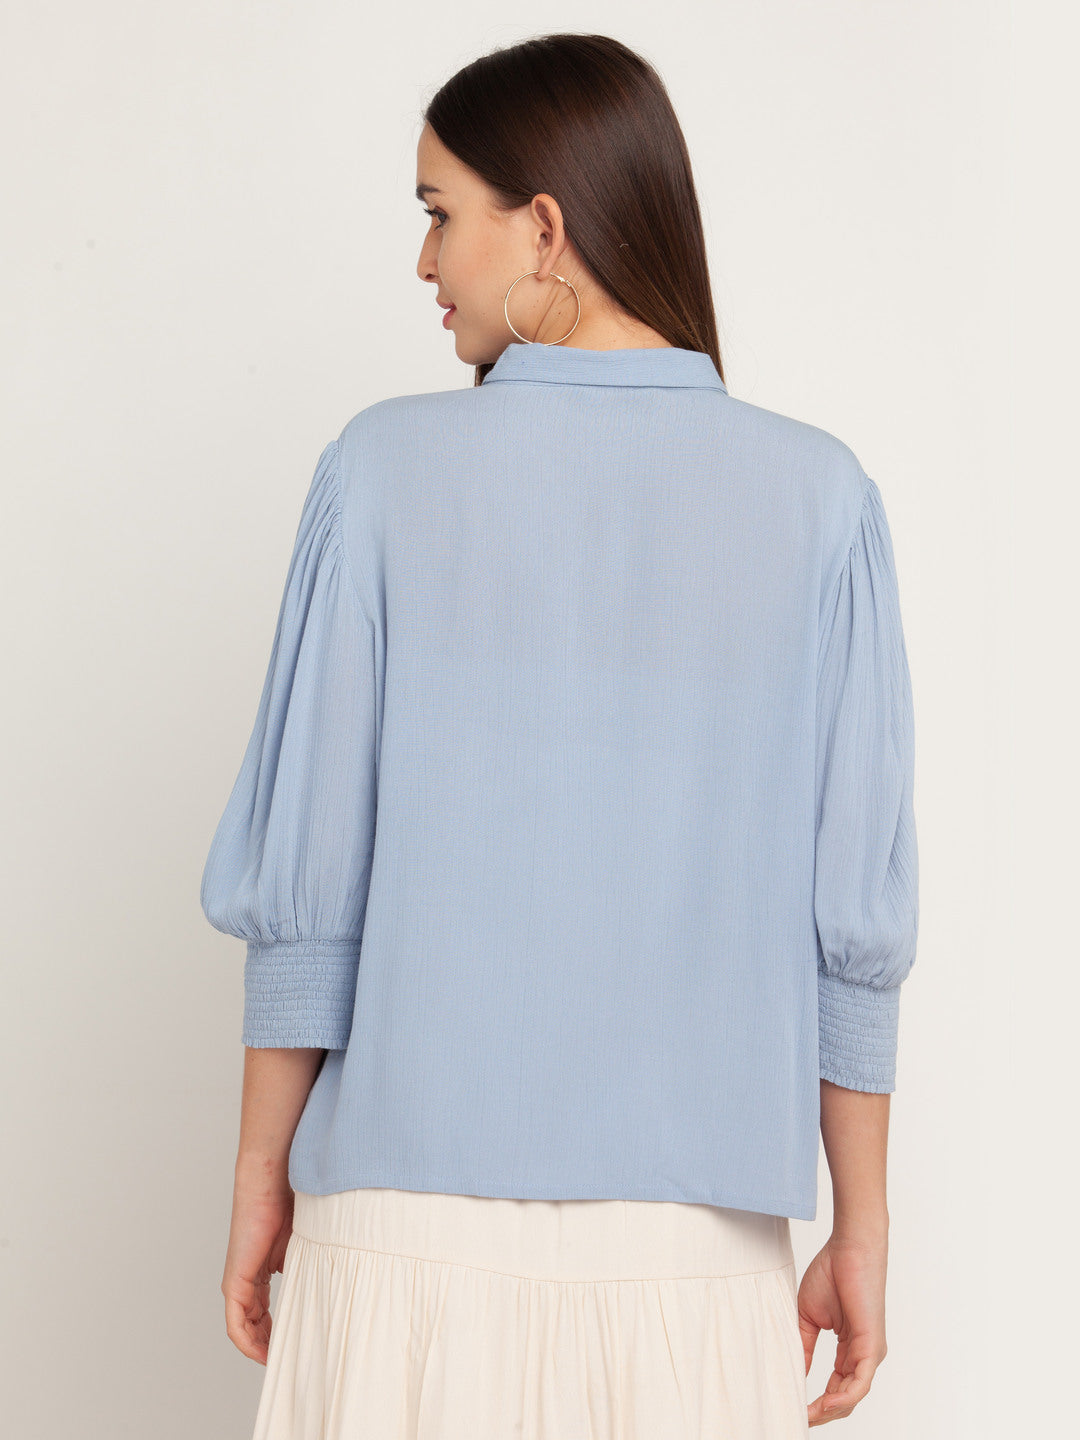 Blue Solid Shirt For Women